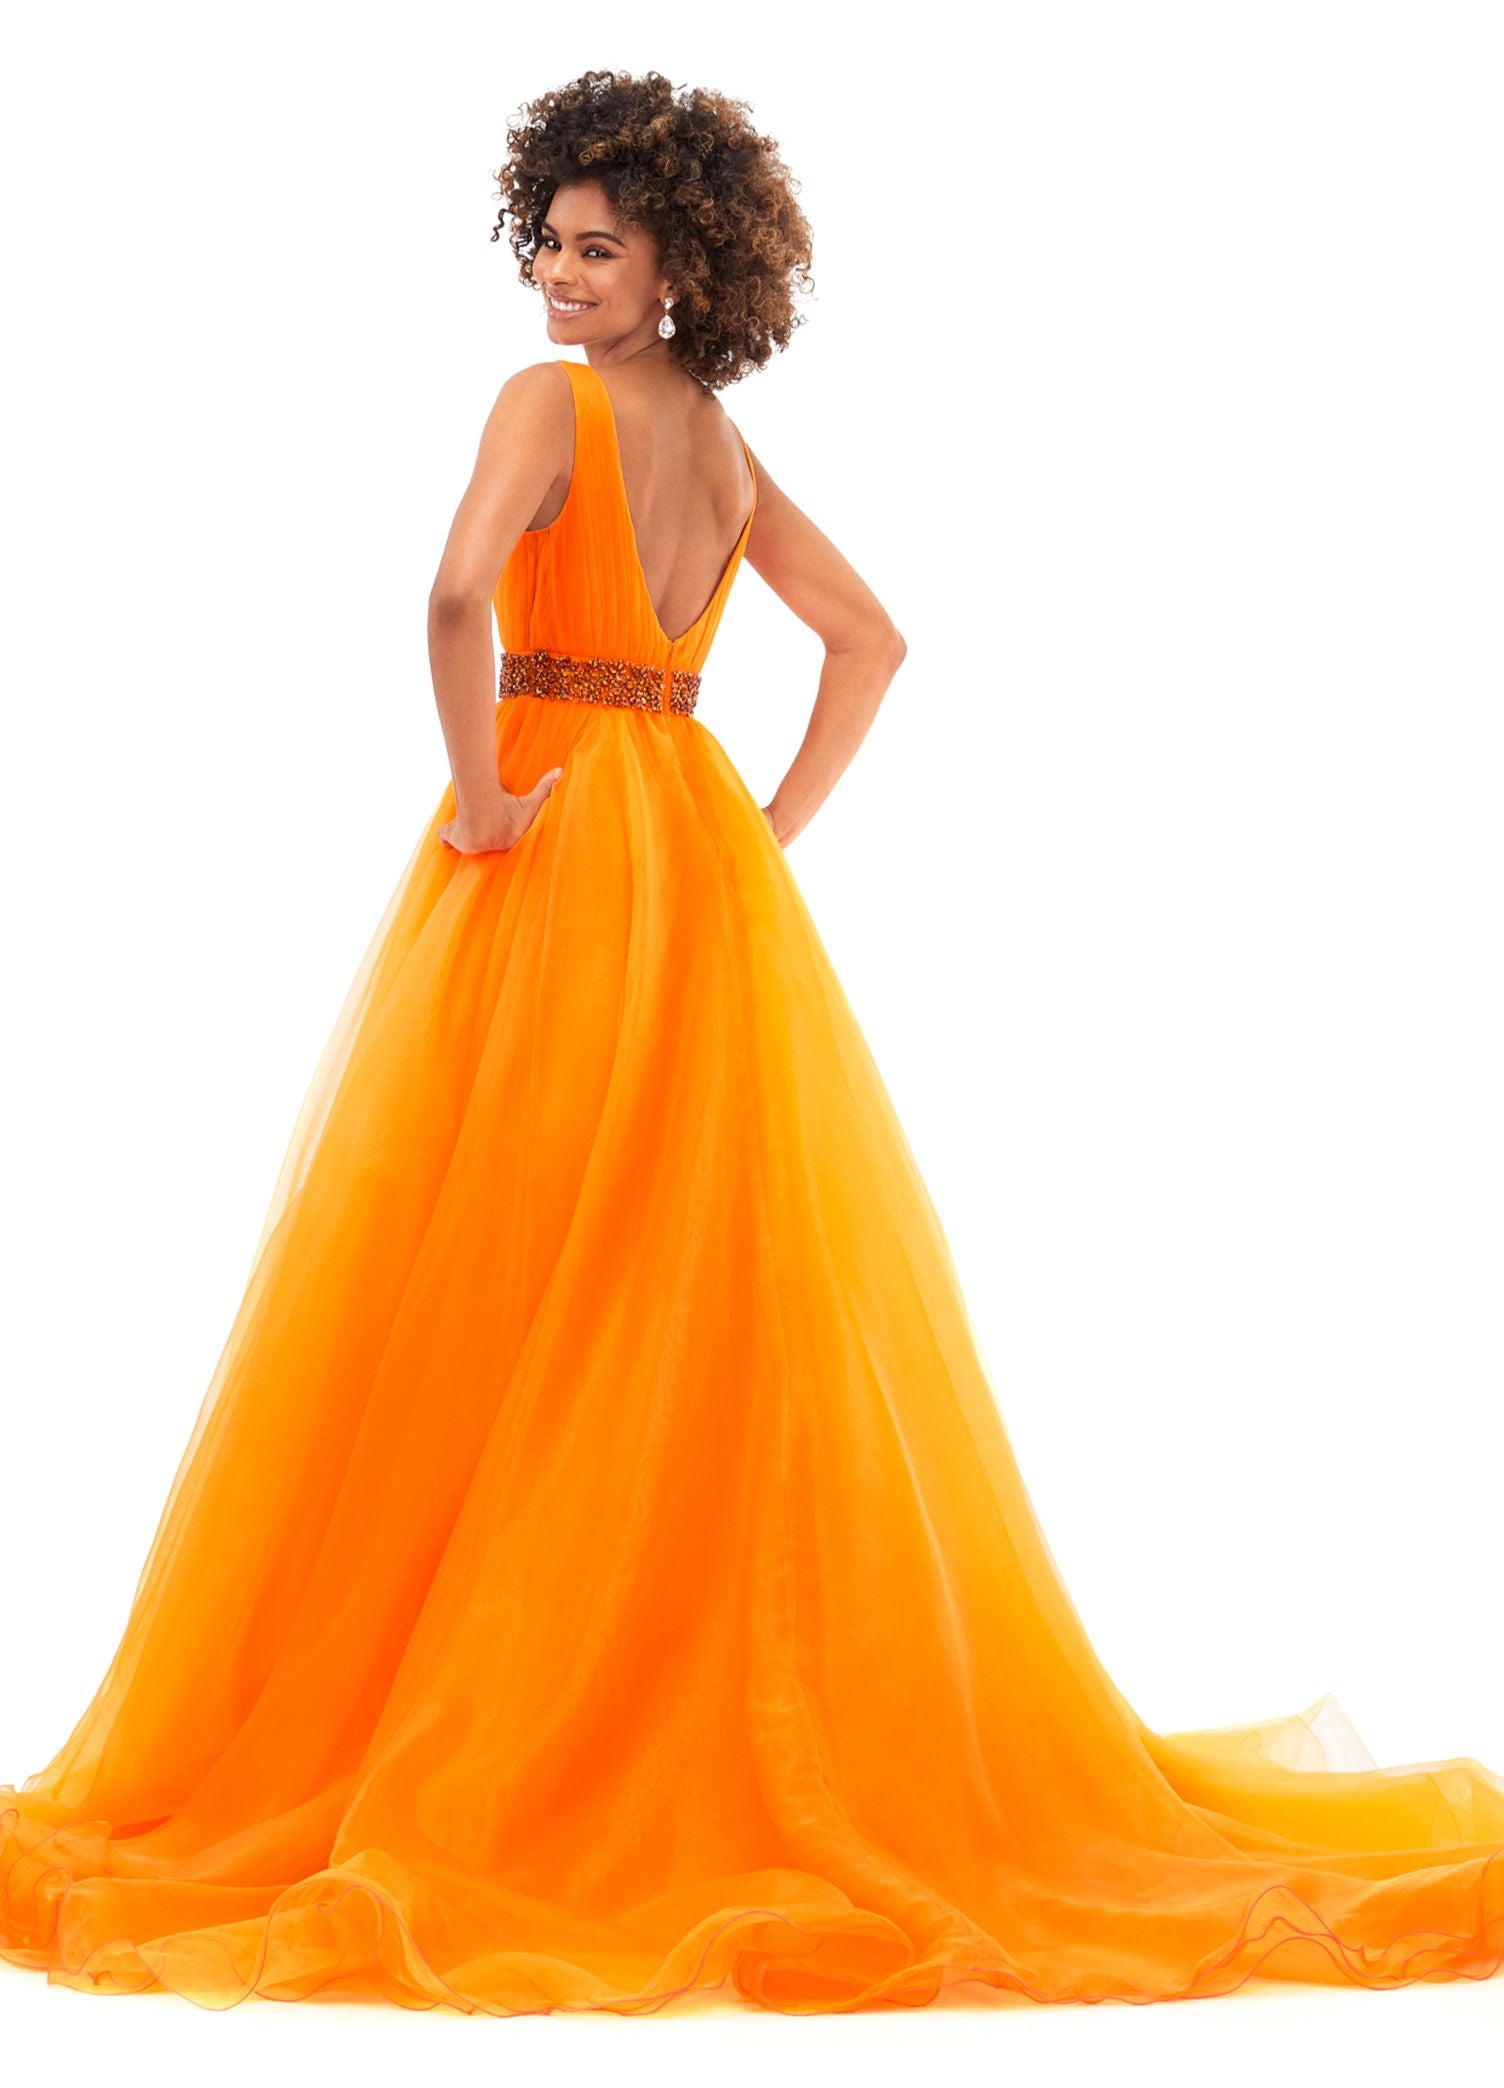 Ashley Lauren 11305 Stand out in this ball gown complete with a crystal encrusted waistband. The bustier has a deep v-neckline and a v-back. The gown is finished with a long, lavish train. V-Neckline V-Back Crystal Belt Organza COLORS: Orange, Royal, Red